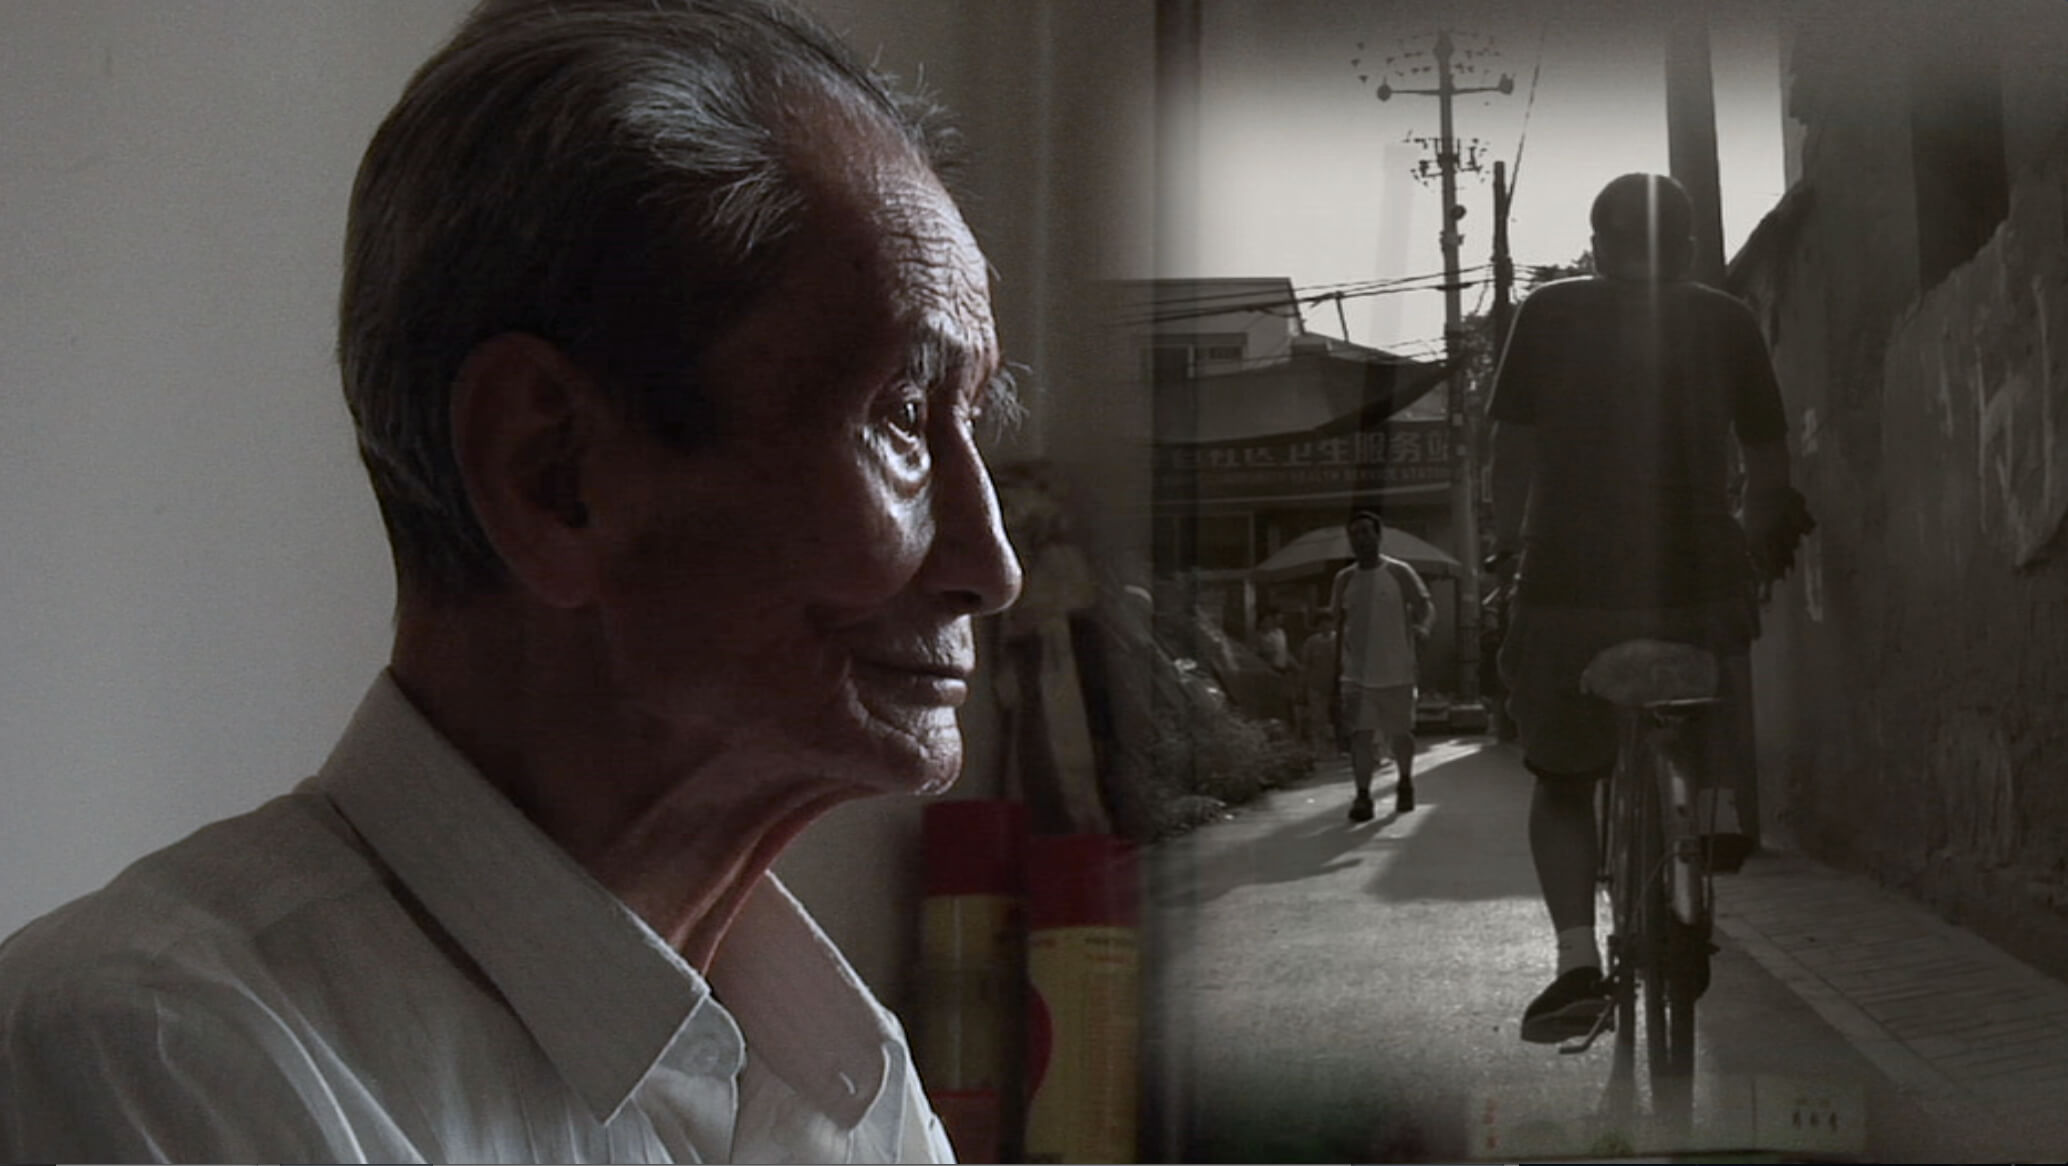 Still from Missing Home: The Last Days of the Beijing Hutongs Weimin Zhang. Close-up of an elderly man looking to the right of the frame where an overlaid black and white image shows a man walking towards a man biking on a street.